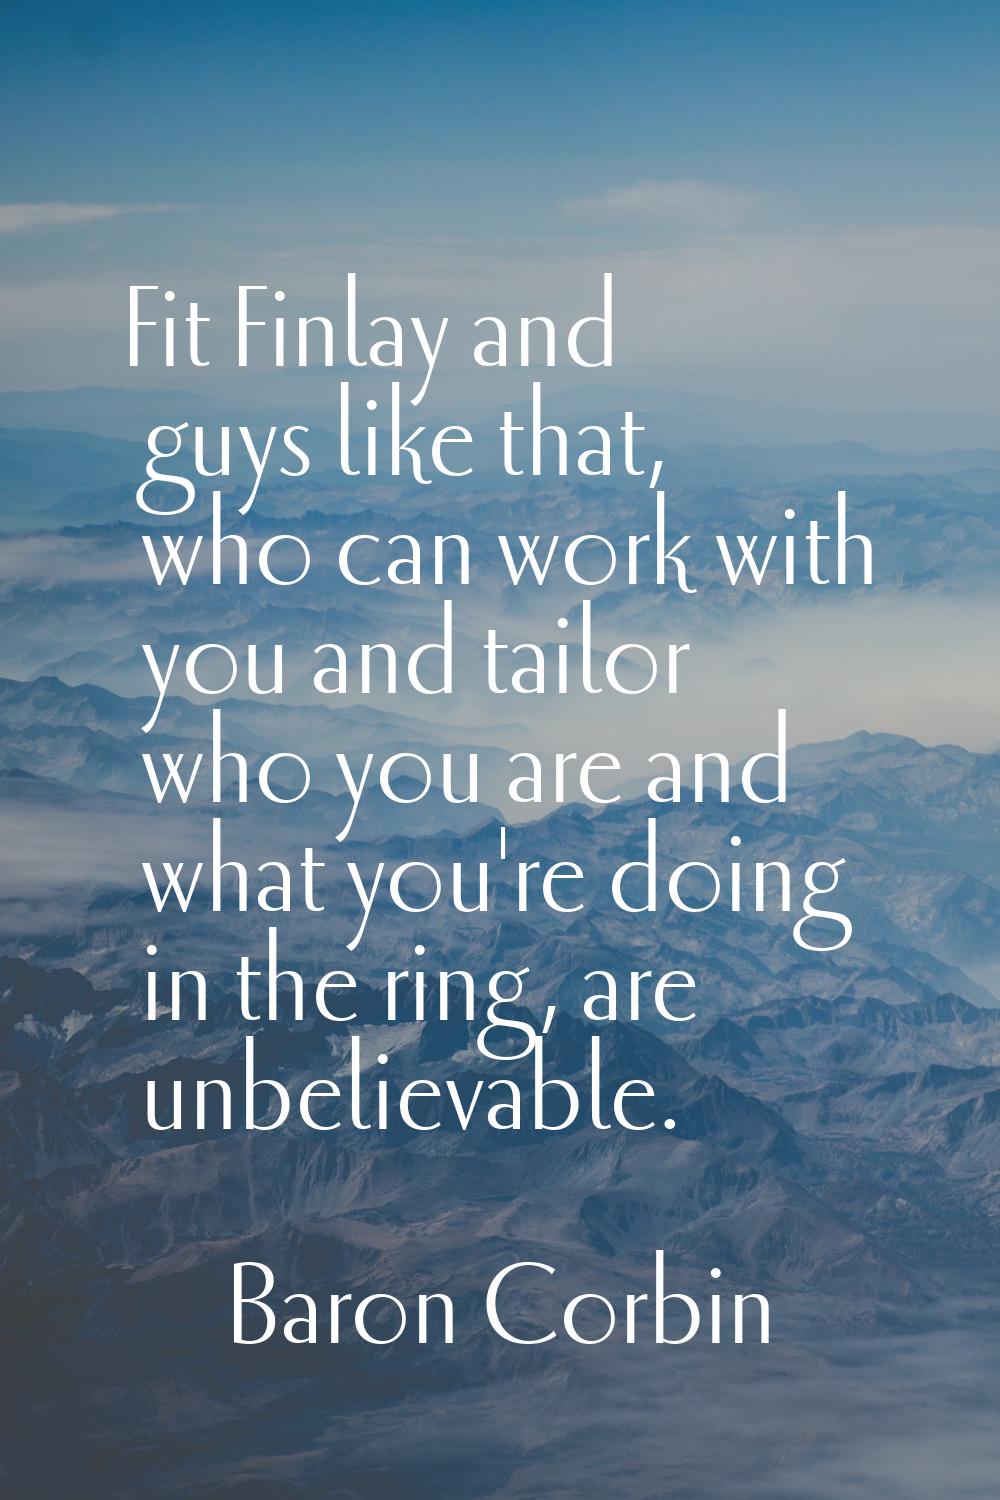 Fit Finlay and guys like that, who can work with you and tailor who you are and what you're doing i